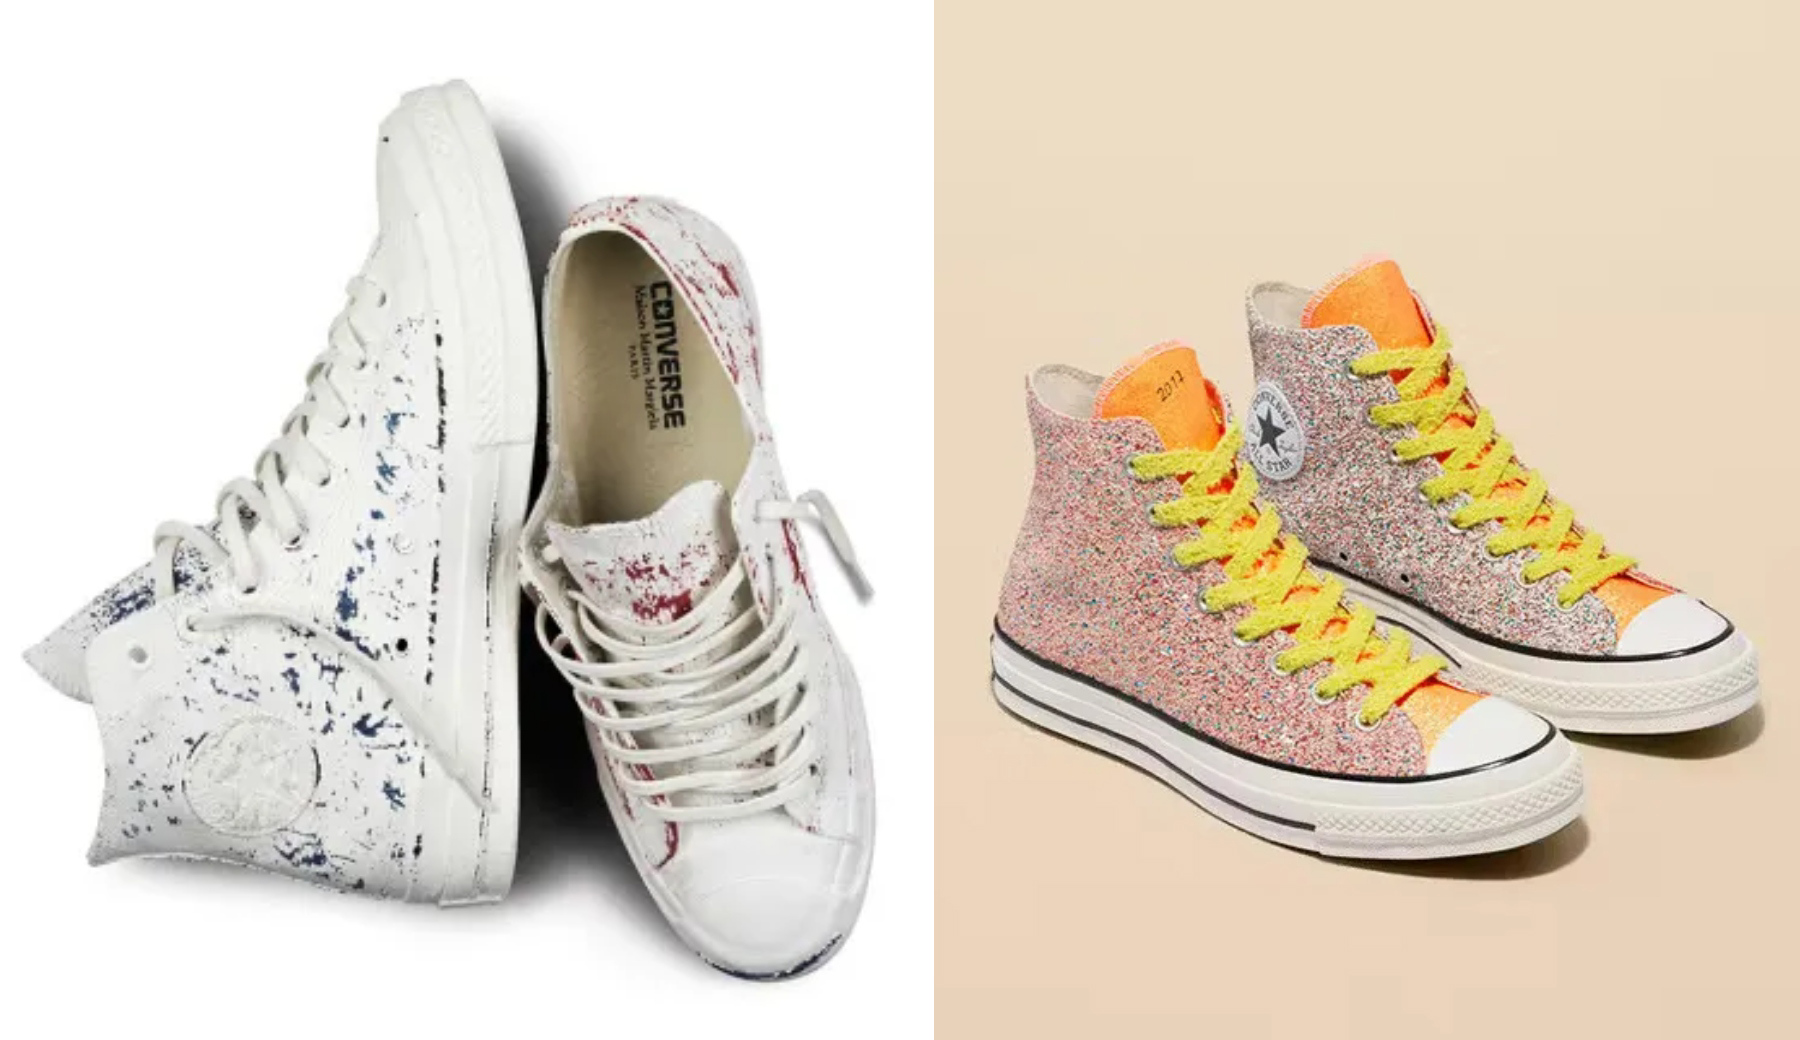 Converse's Most Iconic Collaborations: From Maison Margiela to the Simpsons